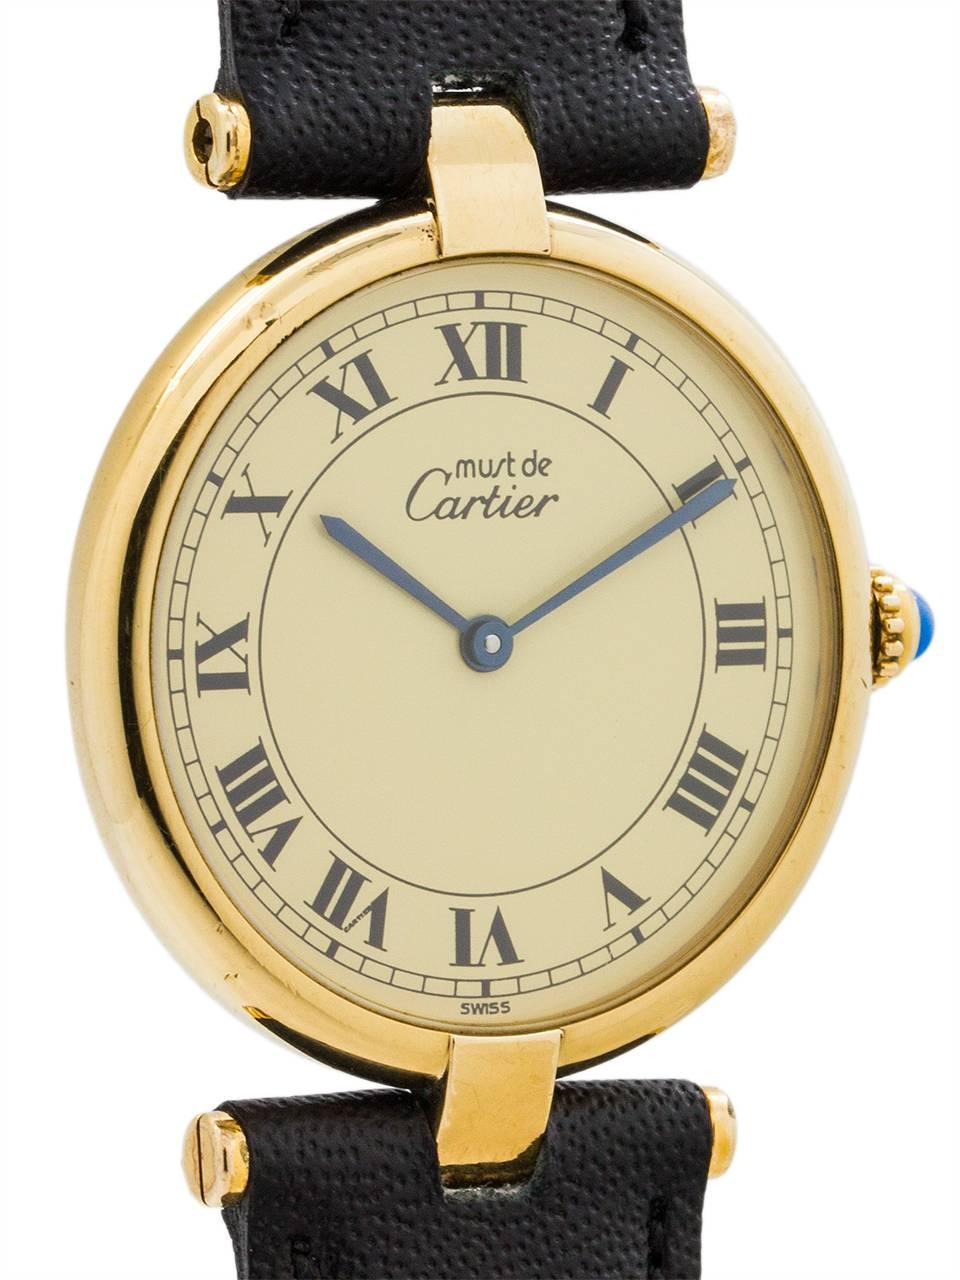 
Cartier Man’s Vermeil Vendome Tank Wristwatch circa 1990s. Case measuring 30.5 x 37mm with T-bar lugs. Featuring cream dial with classic printed Cartier Roman numbers with blued steel hands and blue sapphire cabochon crown. Battery powered quartz